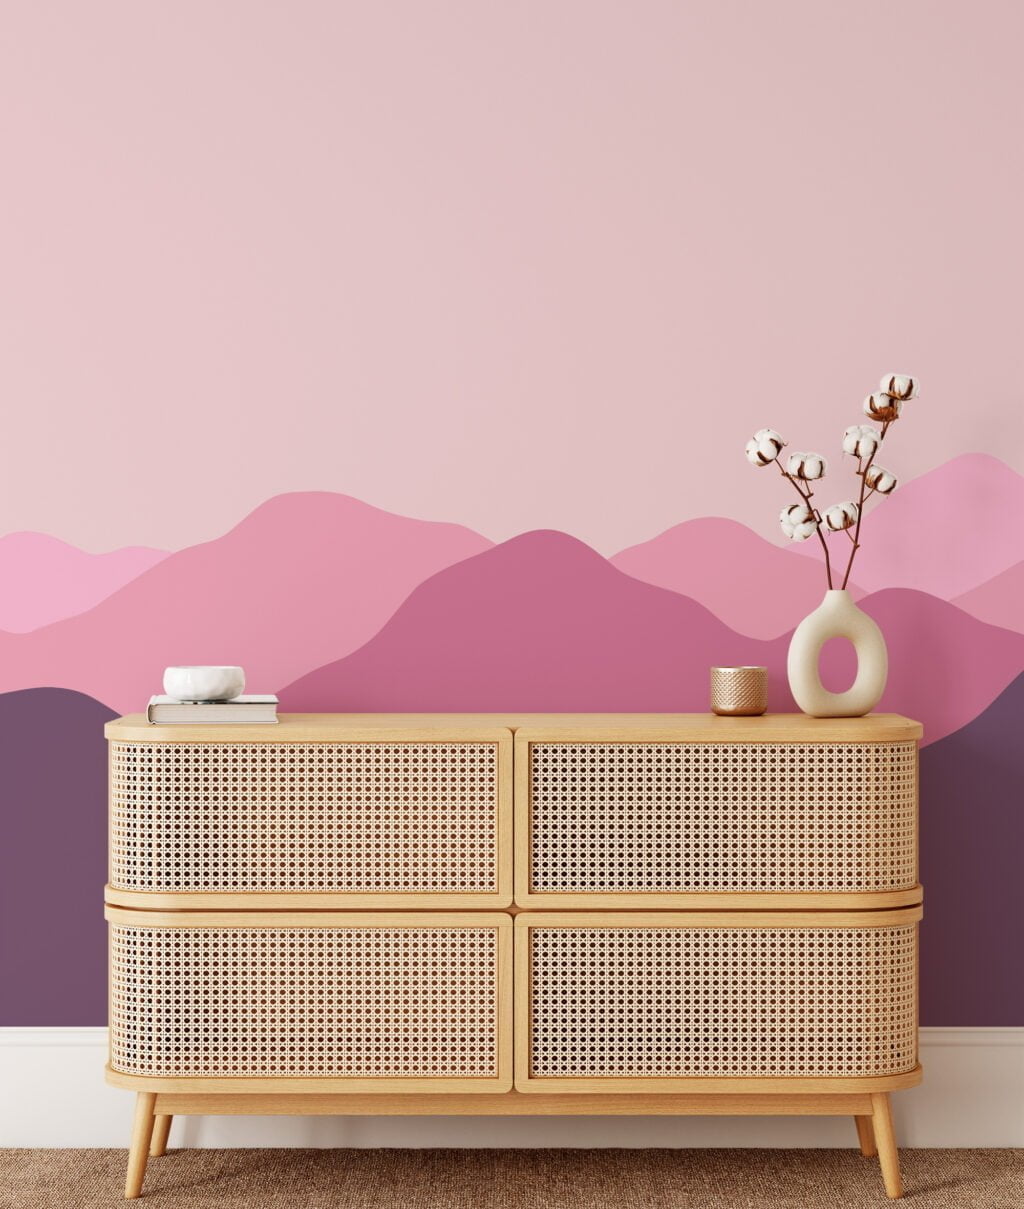 Minimalistic Abstract Mountains Wallpaper with Pink and Purple Hues for a Contemporary and Chic Home Decor